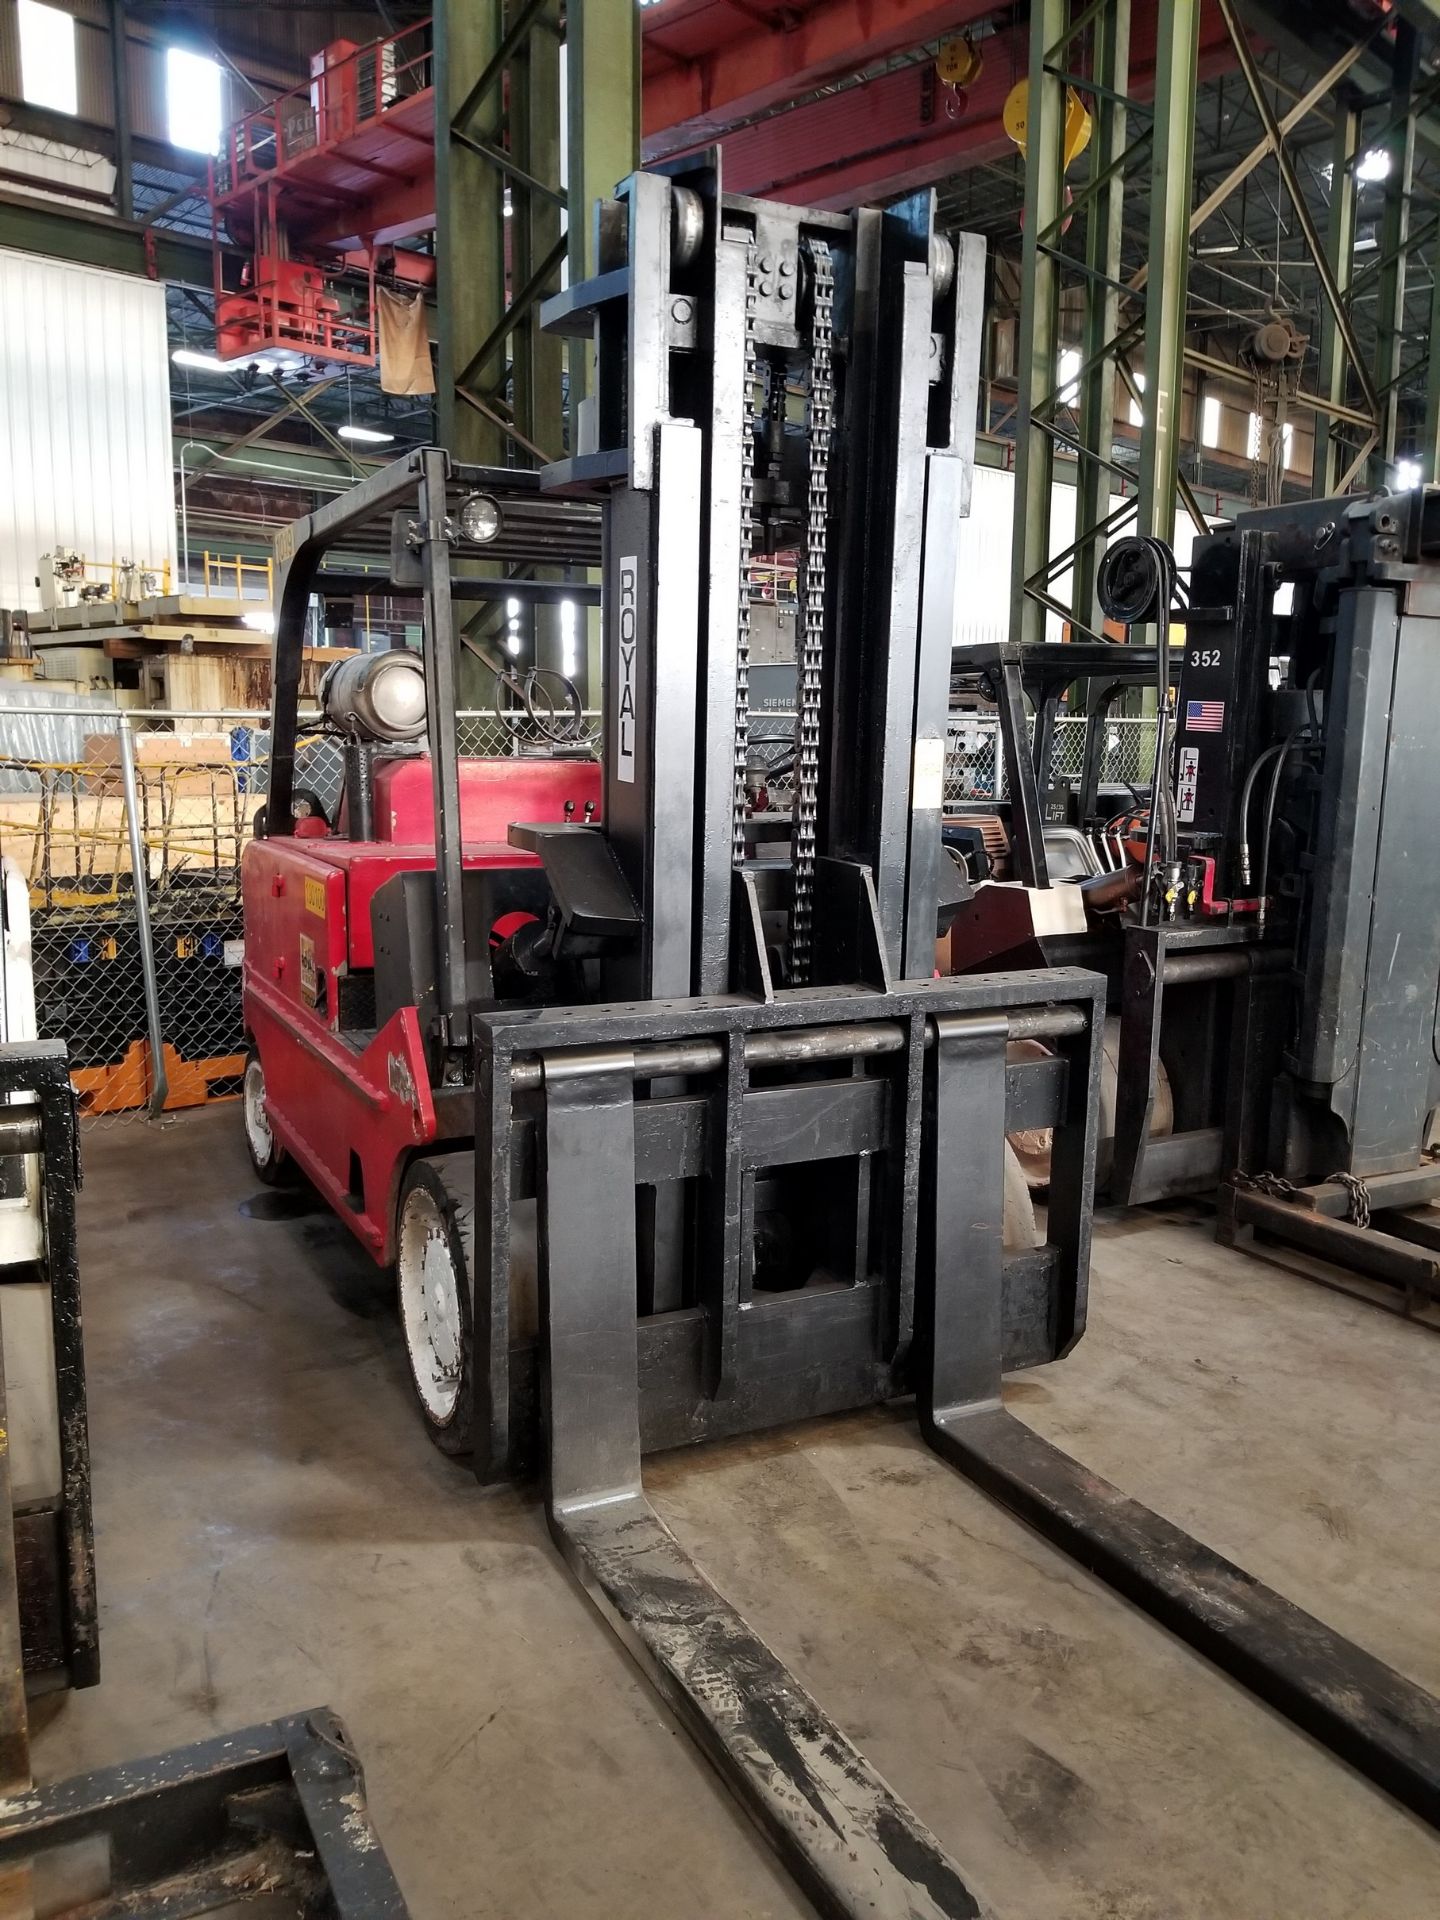 ROYAL T300C 30,000 LB. FORKLIFT; 2-STAGE MAST, 107'' LIFT HEIGHT, 9,436 HOURS, S/N L0670, SOLID - Image 3 of 4